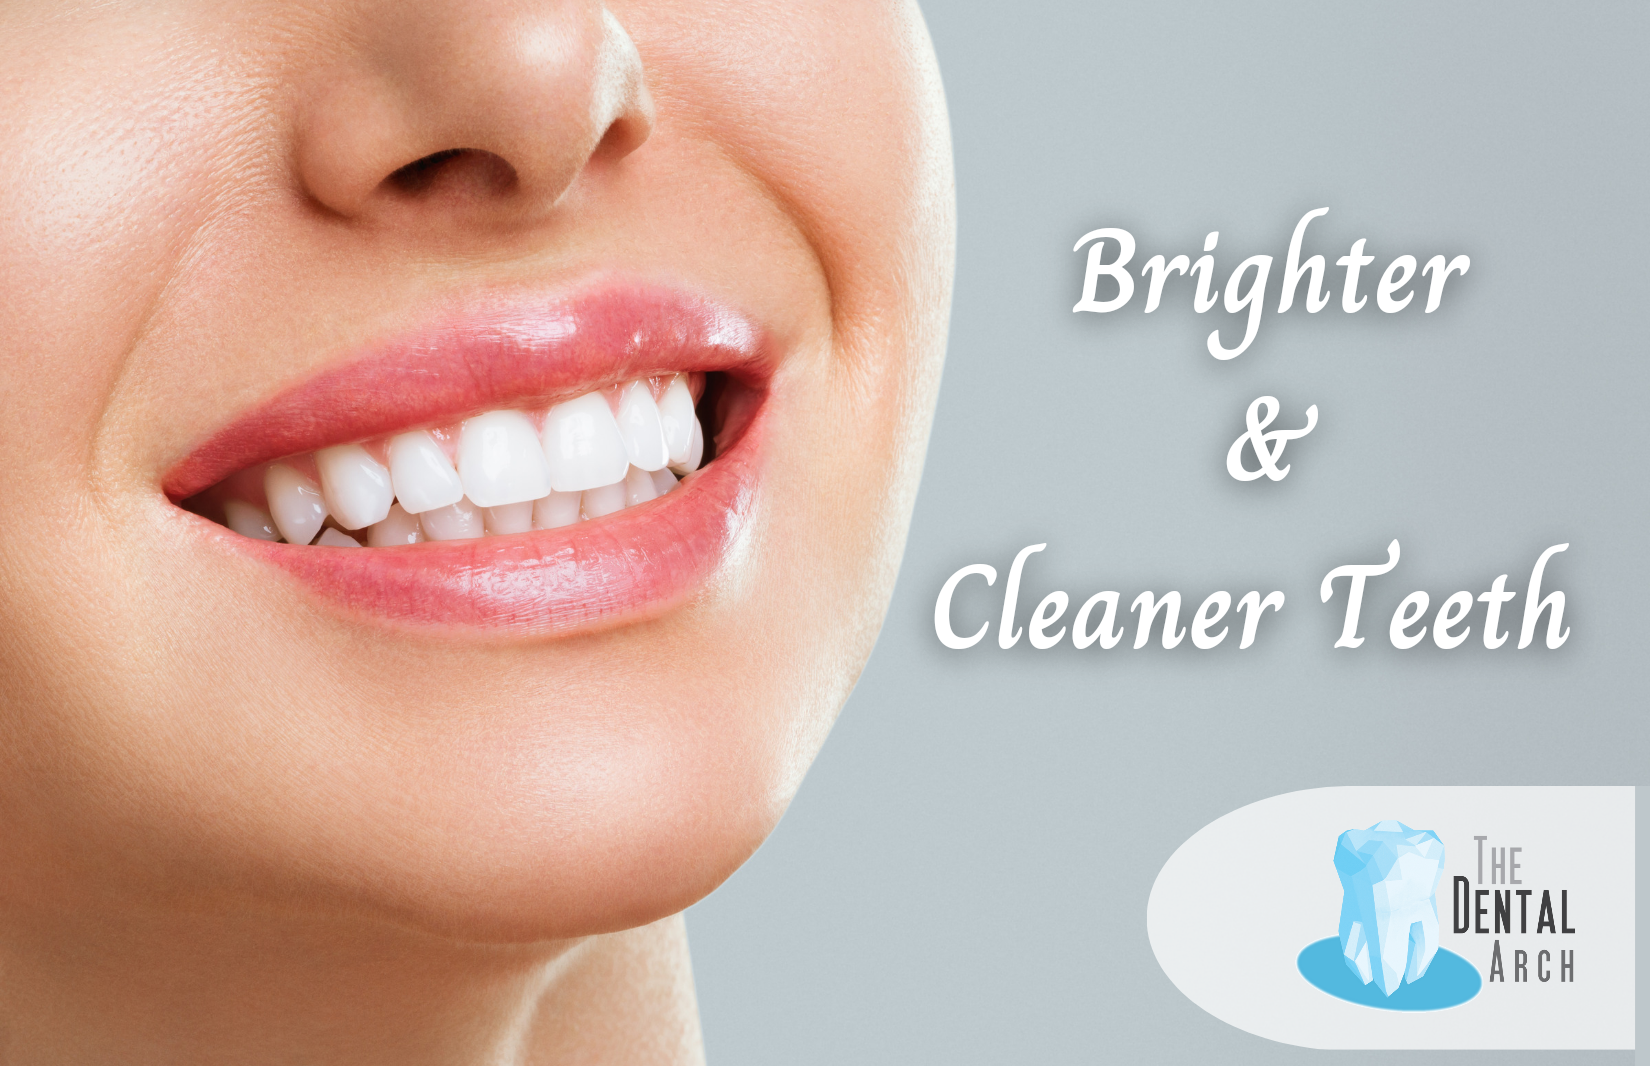 Teeth Scaling and Polishing Cleaning in Bandra